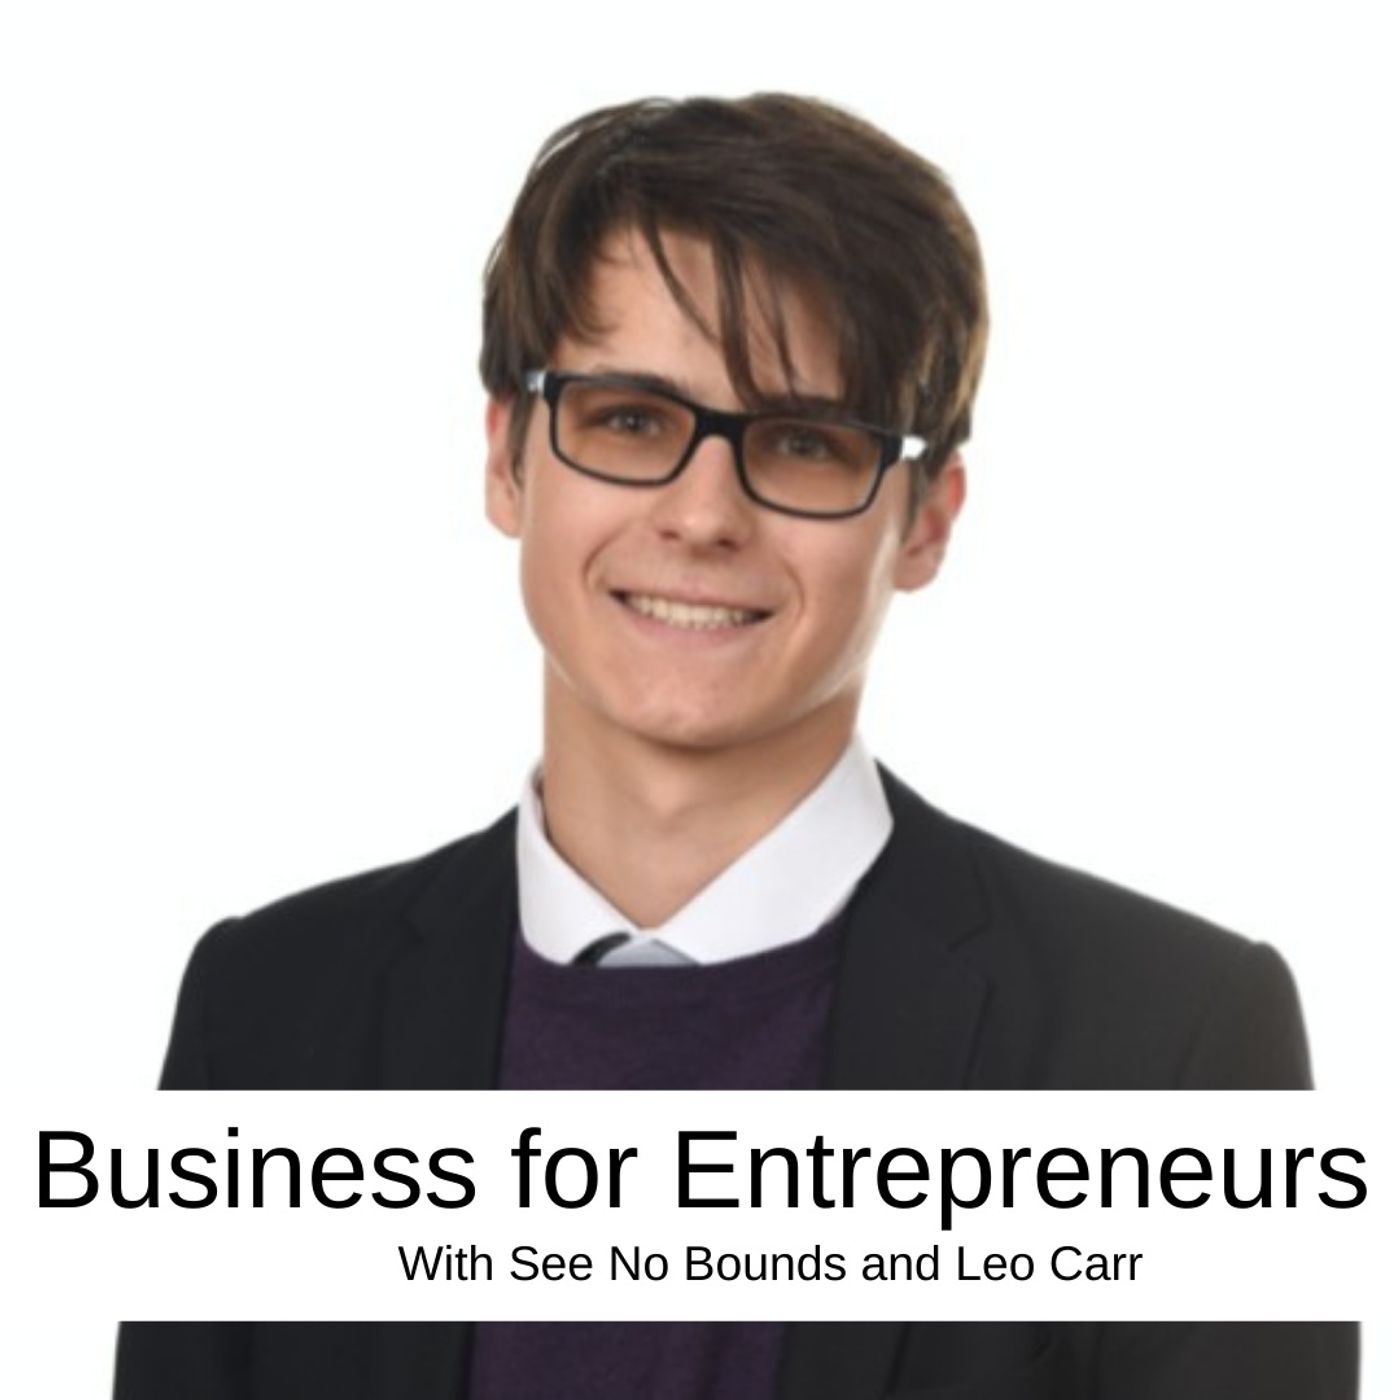 Business for Entrepreneurs with Leo Carr